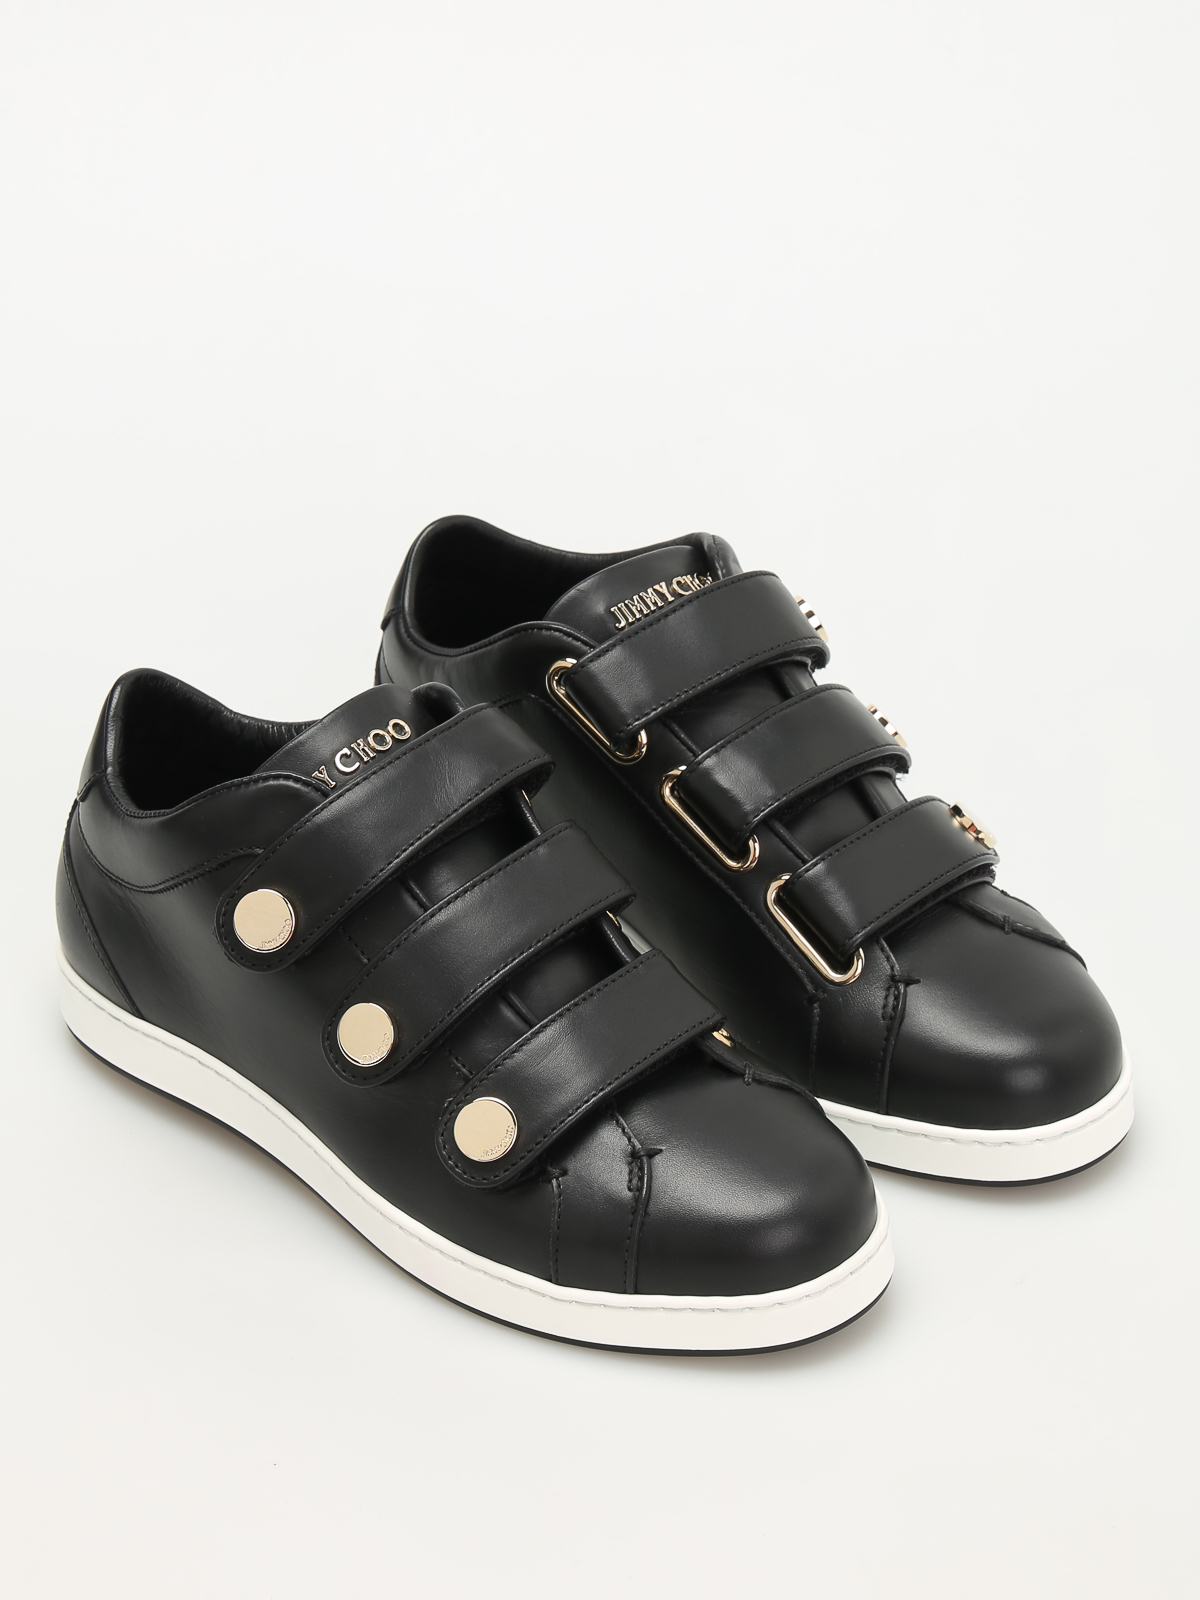 immunisering Bøde Frø Trainers Jimmy Choo - NY leather Velcro sneakers - NYCLFBLACK